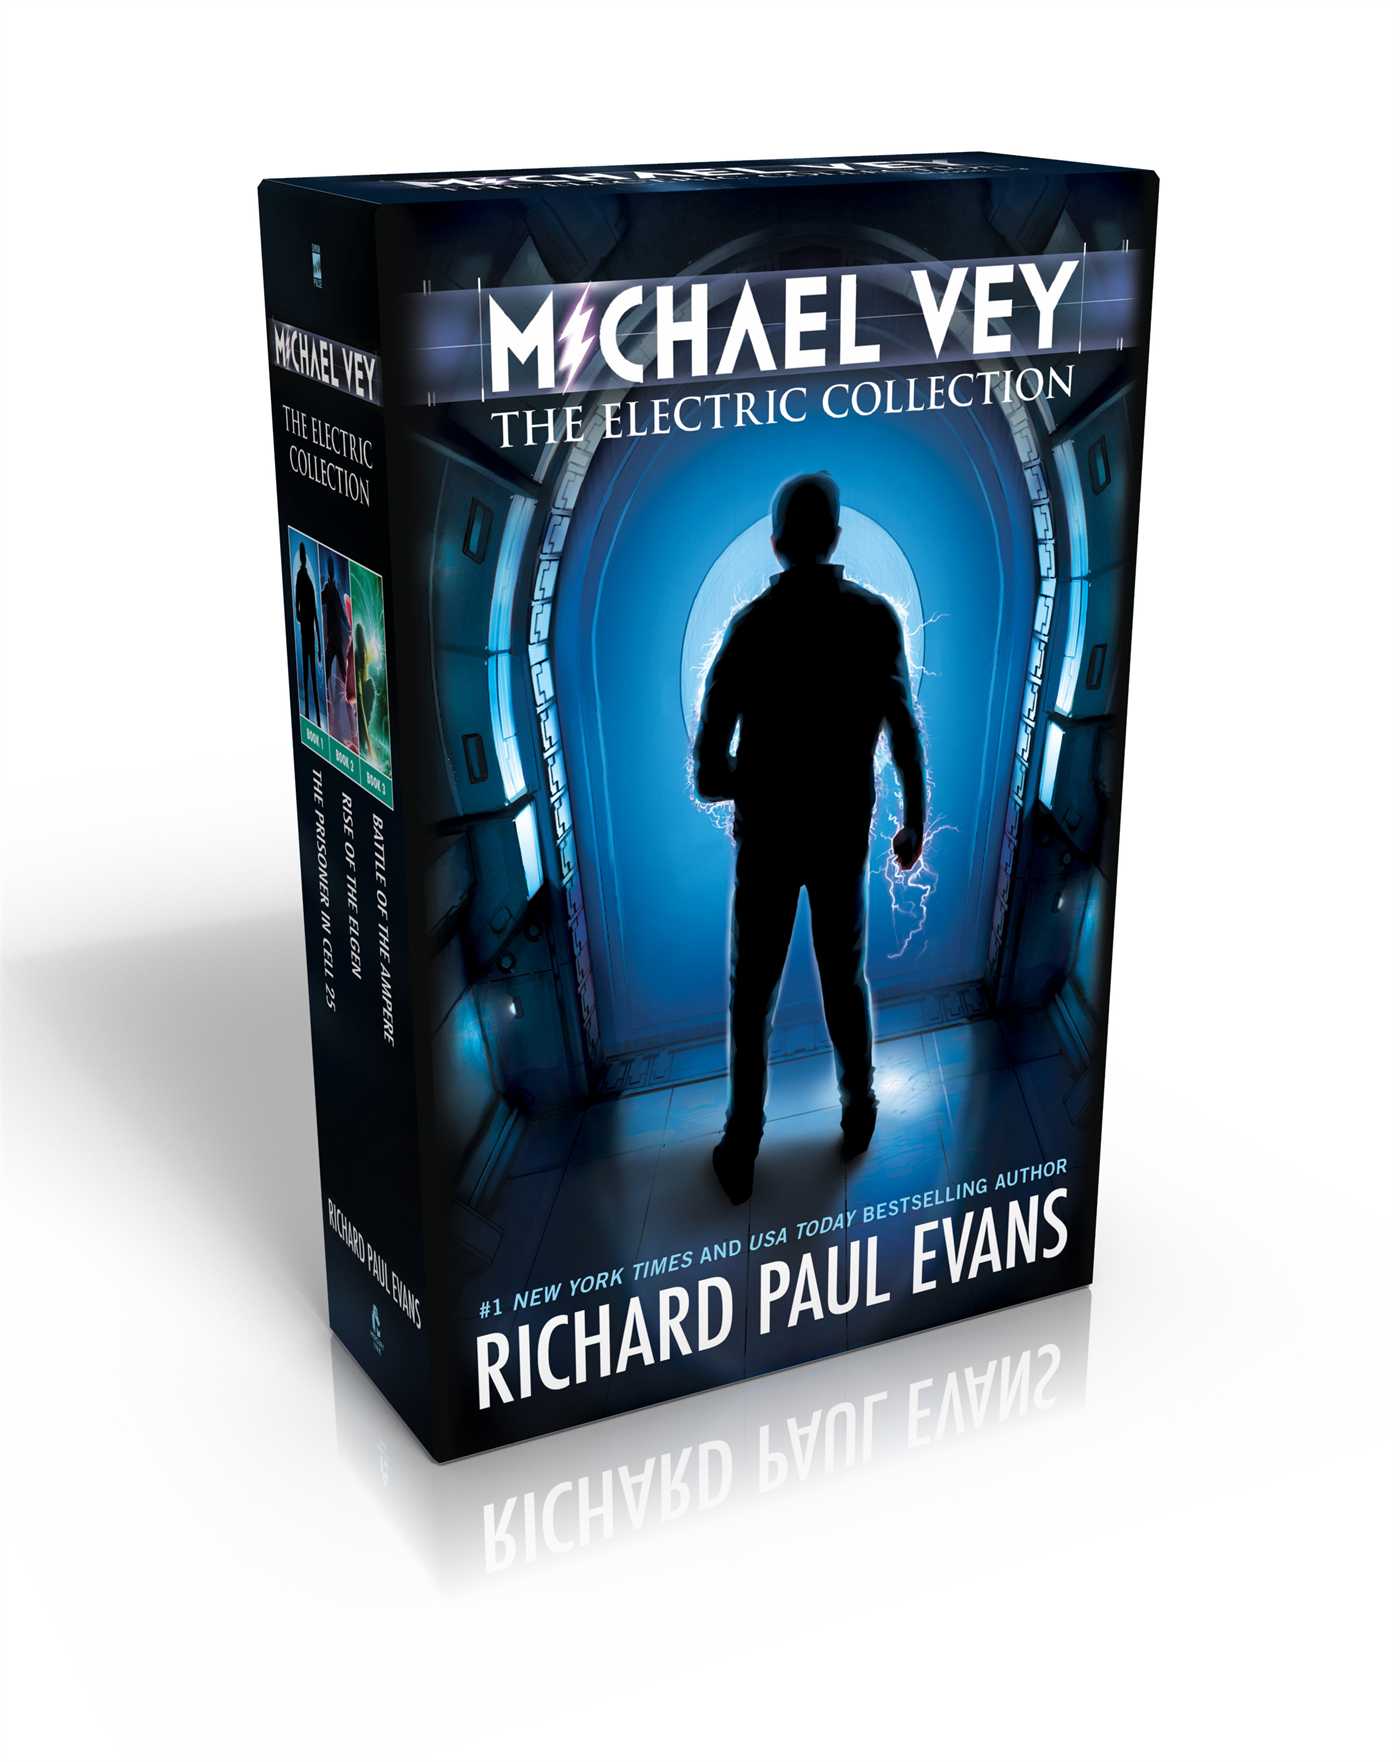 Michael Vey, the Electric Collection (Books 1-3)